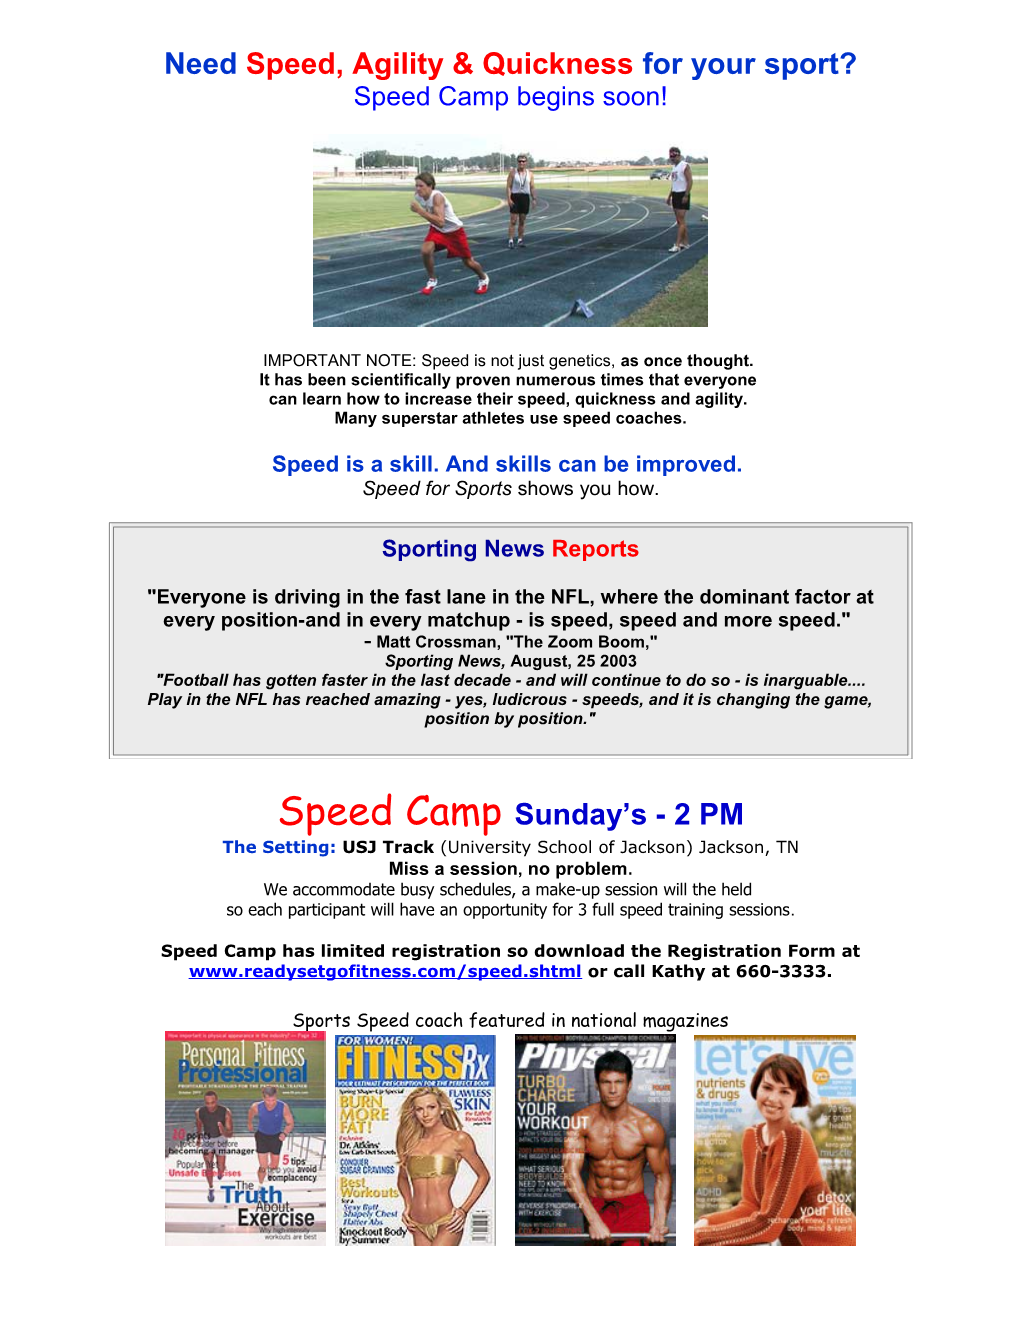 Need Speed, Agility & Quicknessfor Your Sport? Speed Camp Begins Soon!